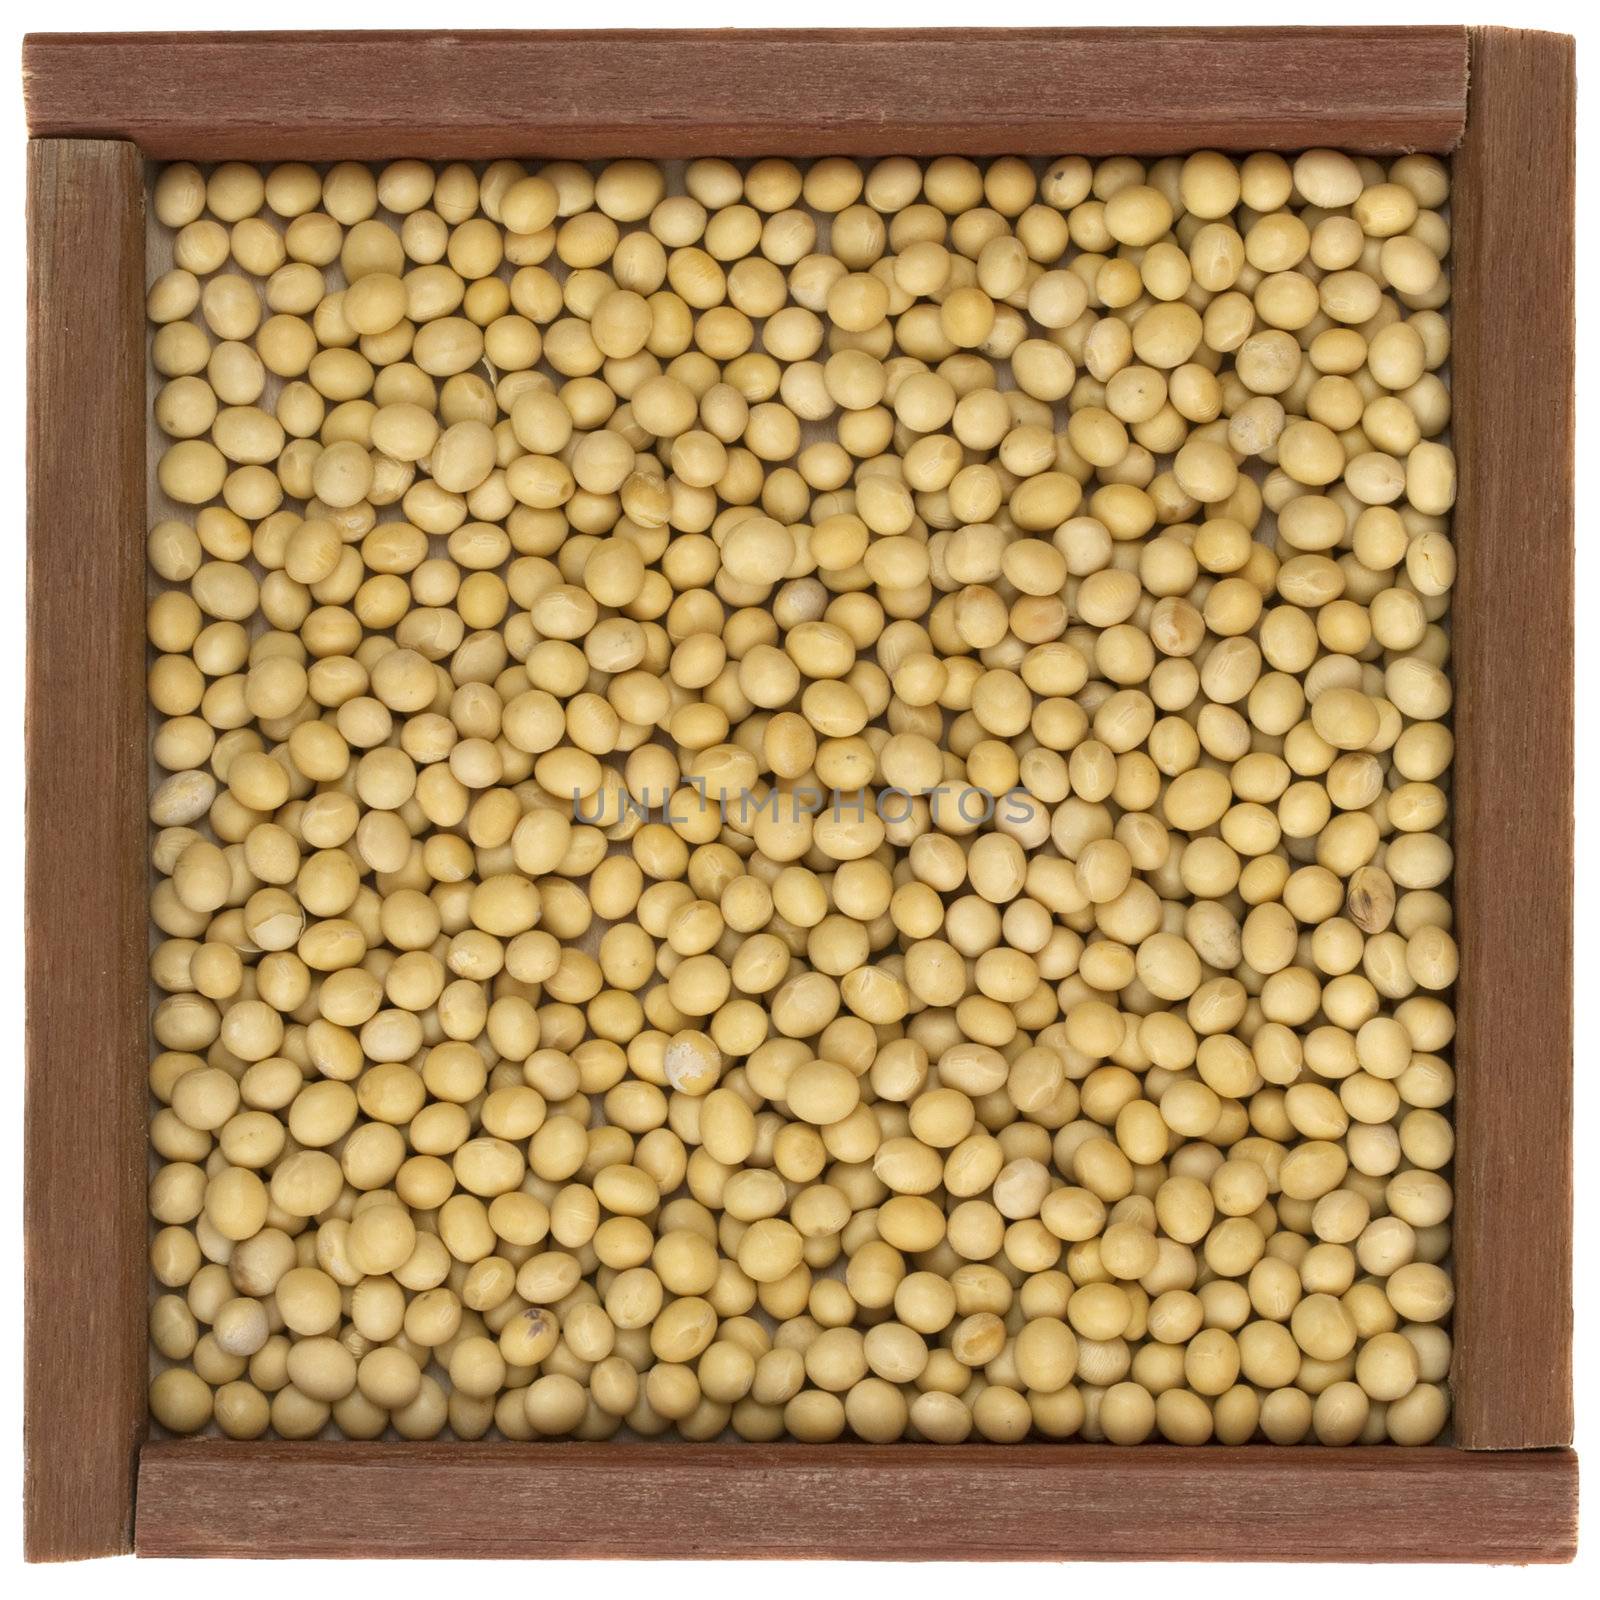 yellow soy beans in a rustic, square, wooden box or frame, isolated on white